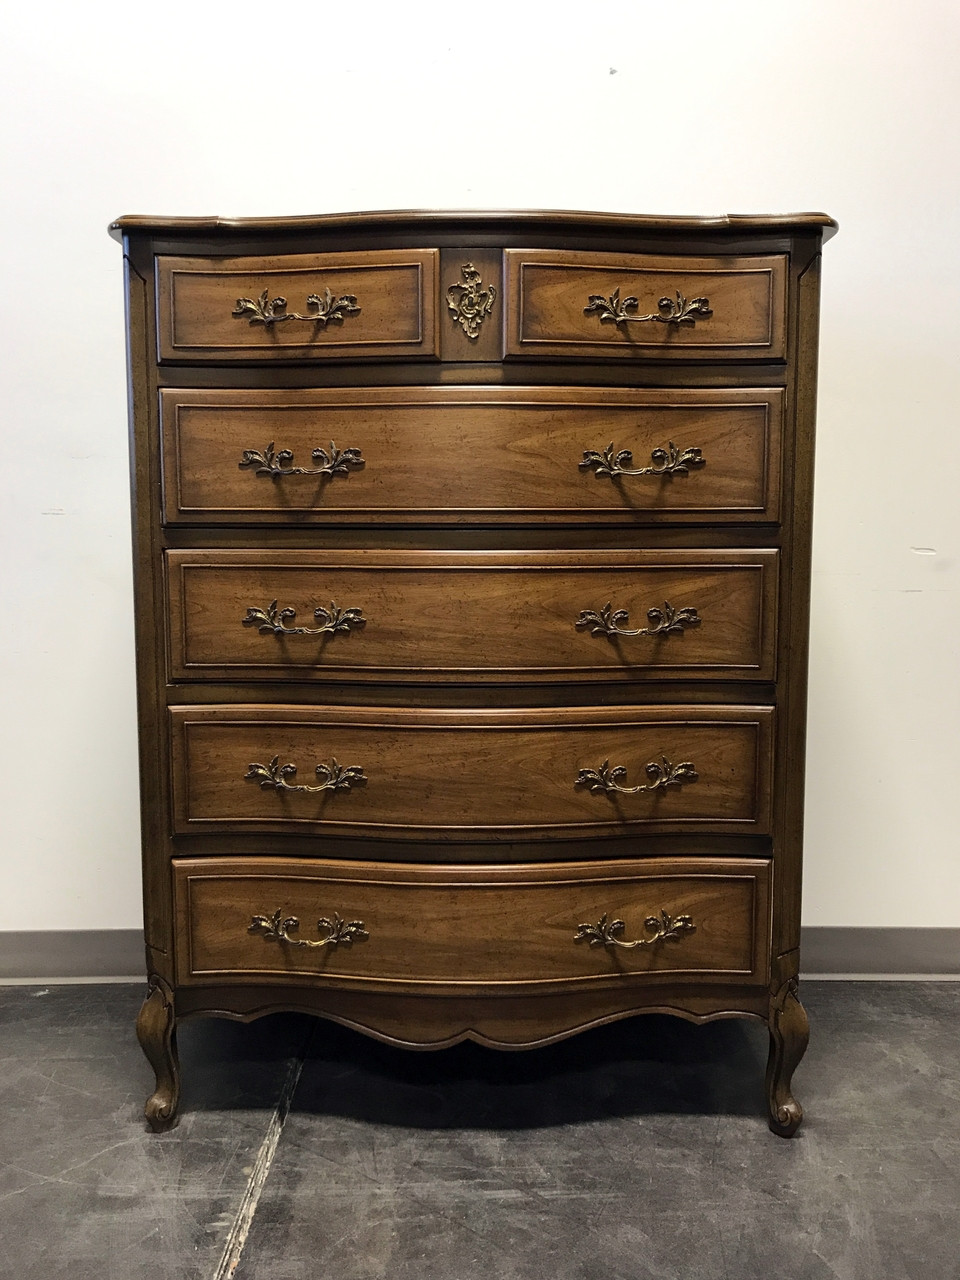 Sold Out French Provincial Louis Xv Chest Of Drawers By National